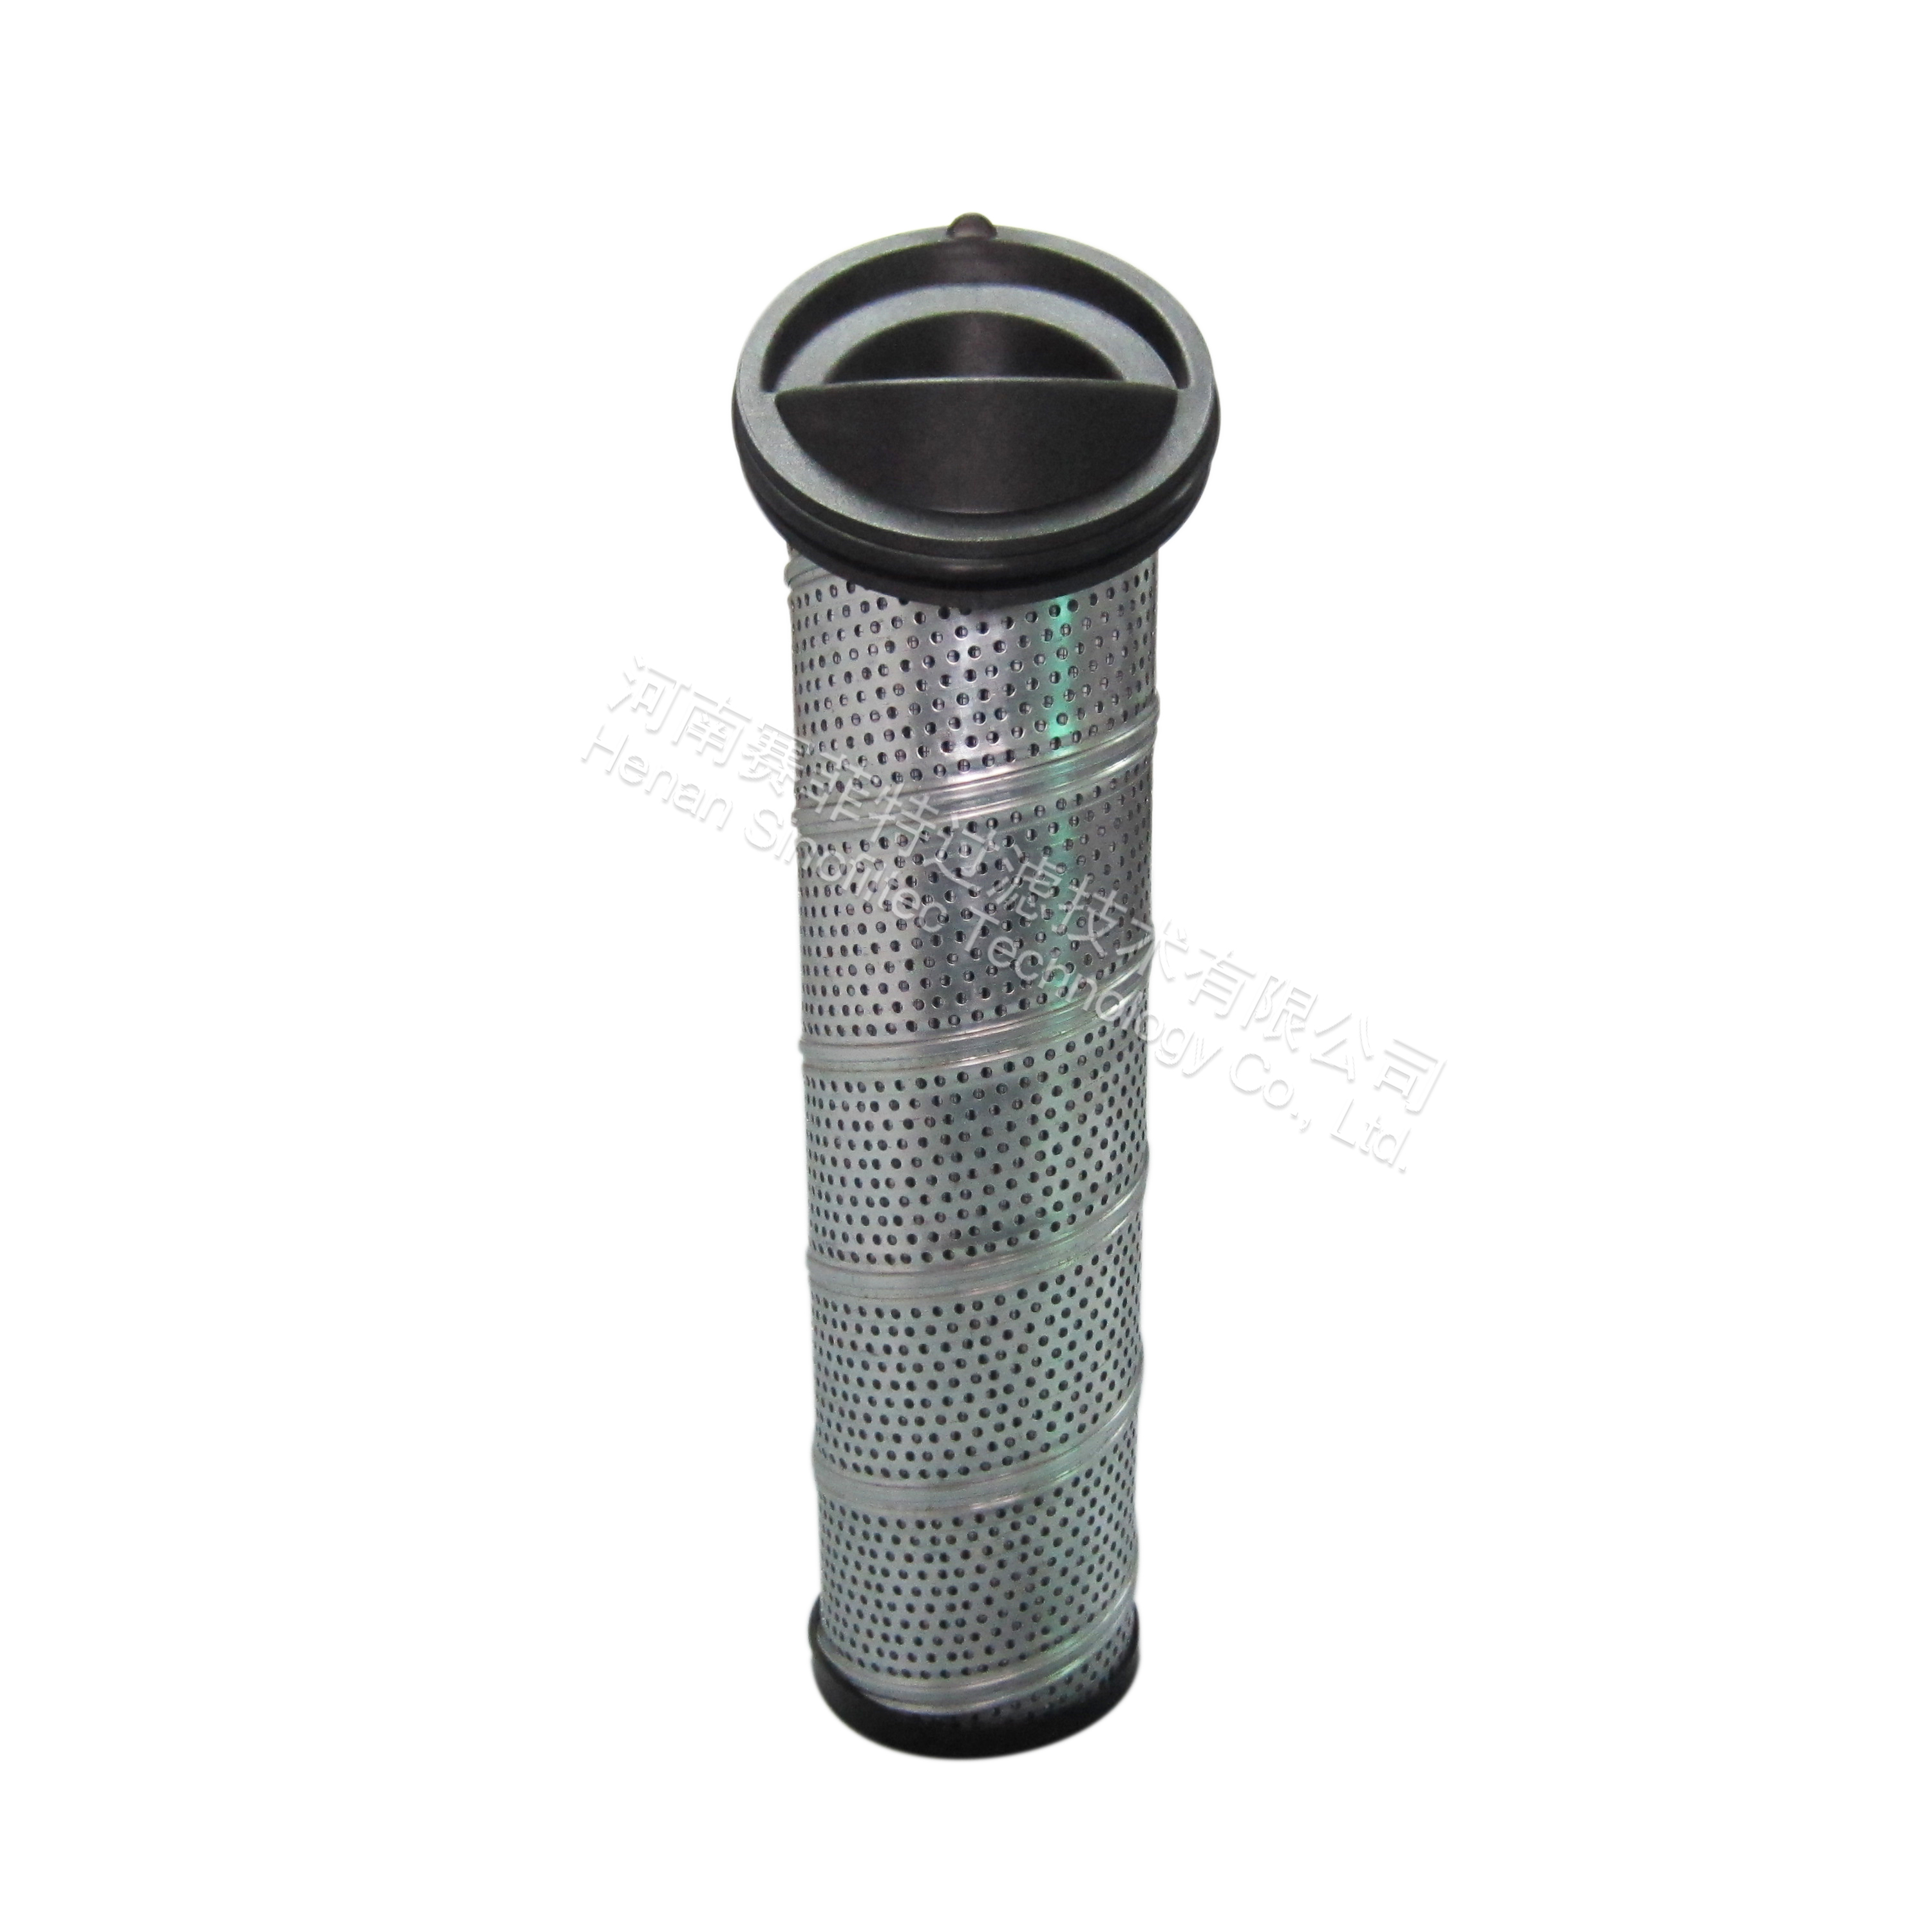 PARKER 937407Q Hydraulic Filters